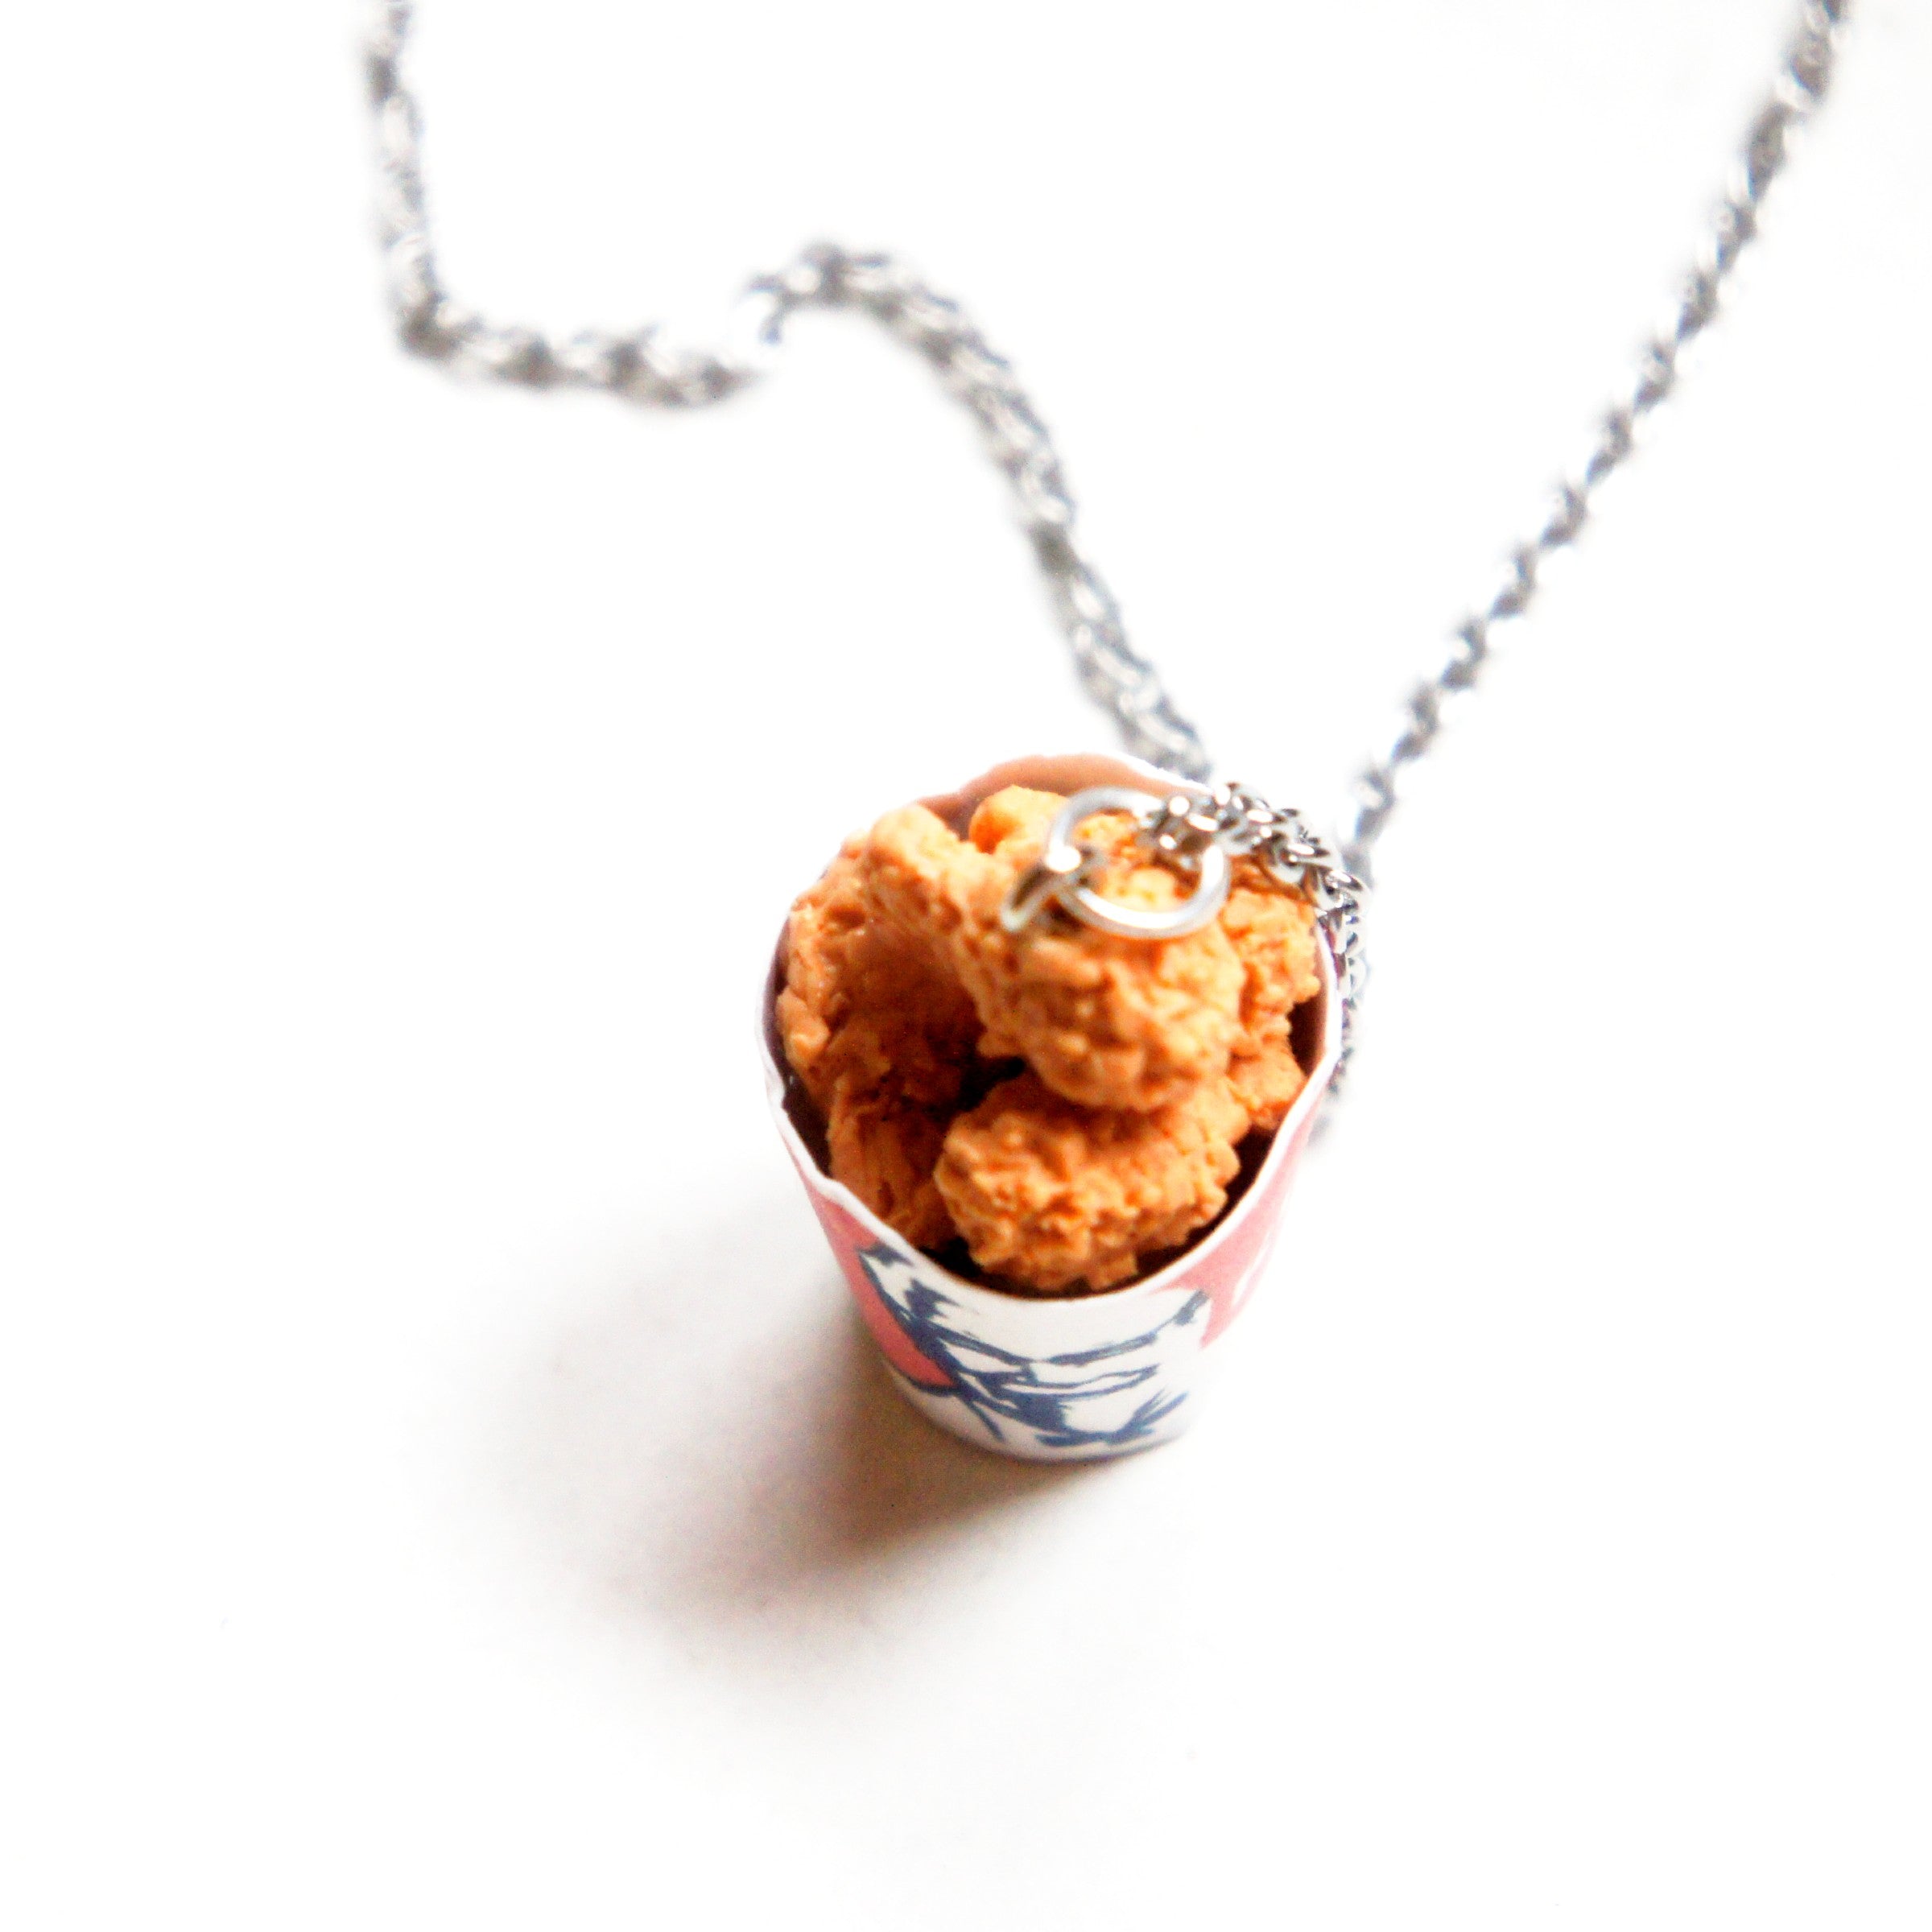 Fried Chicken Necklace Funny Food Necklace Quirky Gifts Weird Jewelry - Etsy